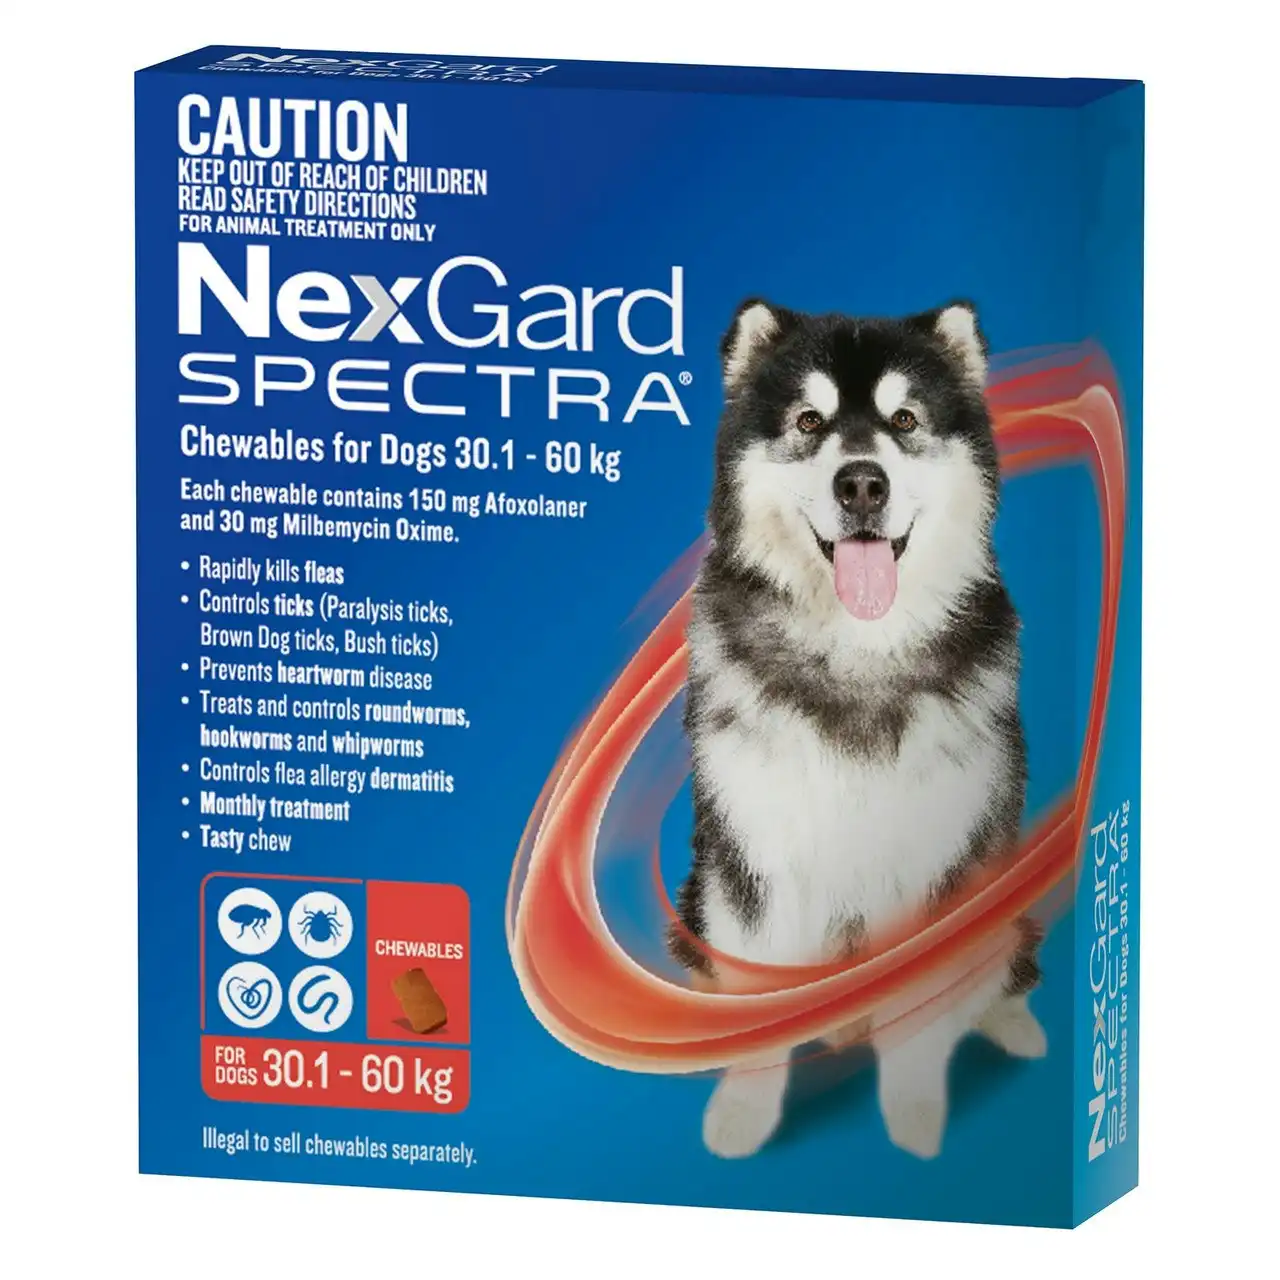 Nexgard Spectra Chewables For Dogs 30.1 - 60kg 6 Pack